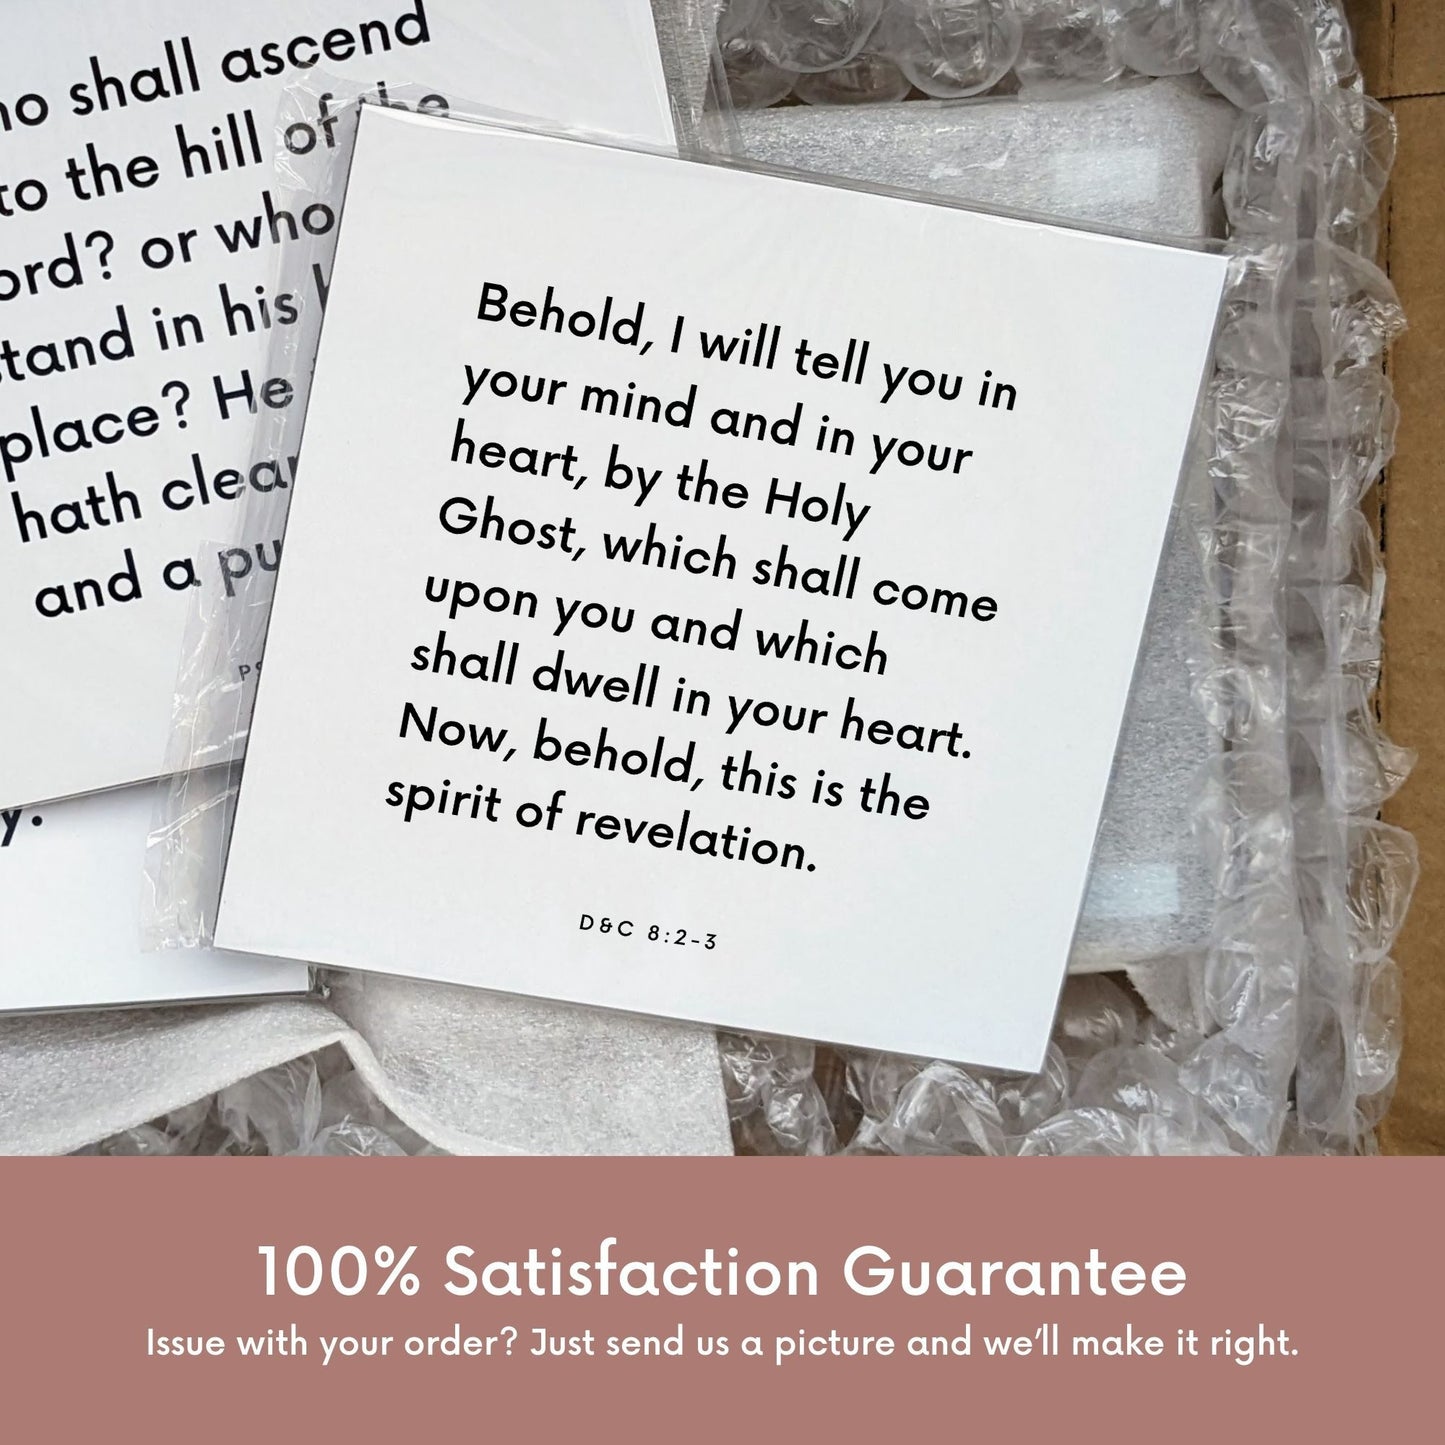 Shipping materials for scripture tile of D&C 8:2-3 - "I will tell you in your mind and in your heart"